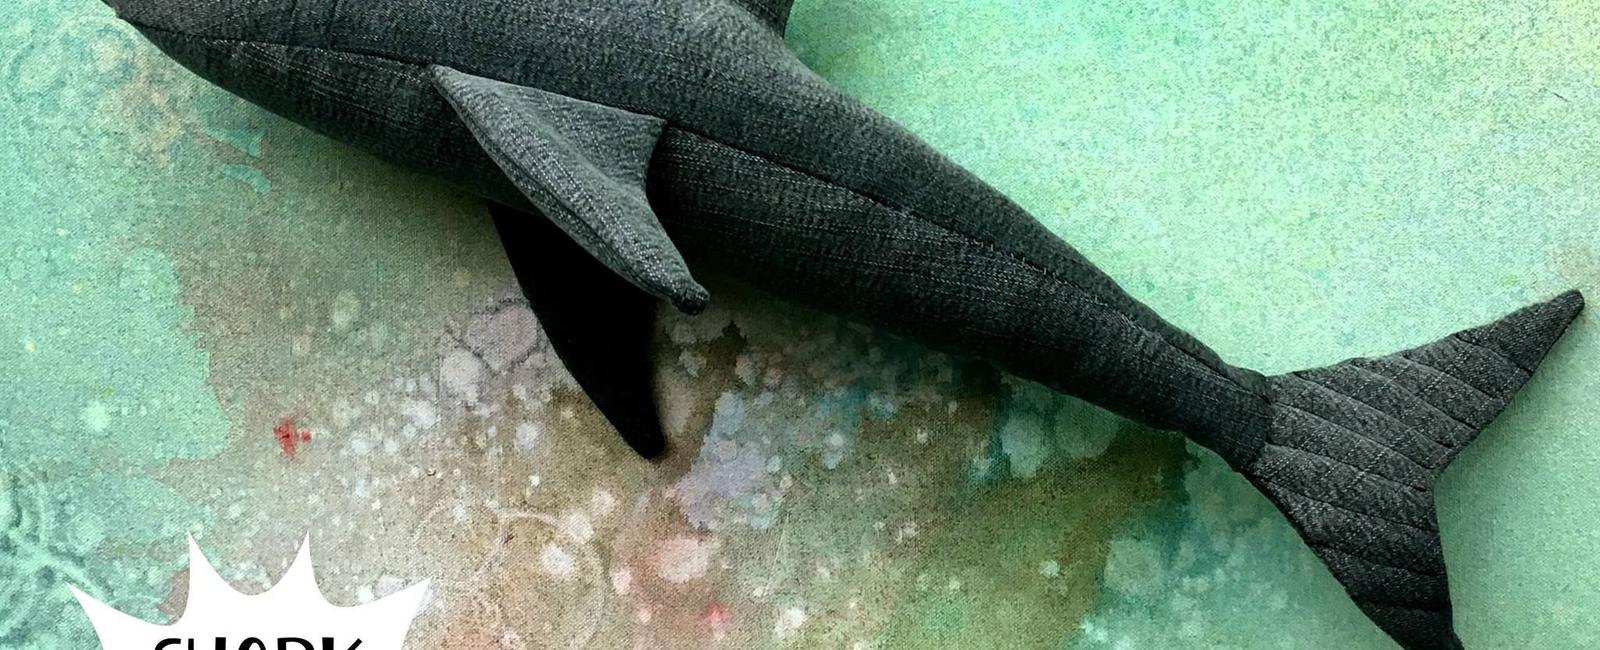 Sharkskin has tiny tooth like scales all over